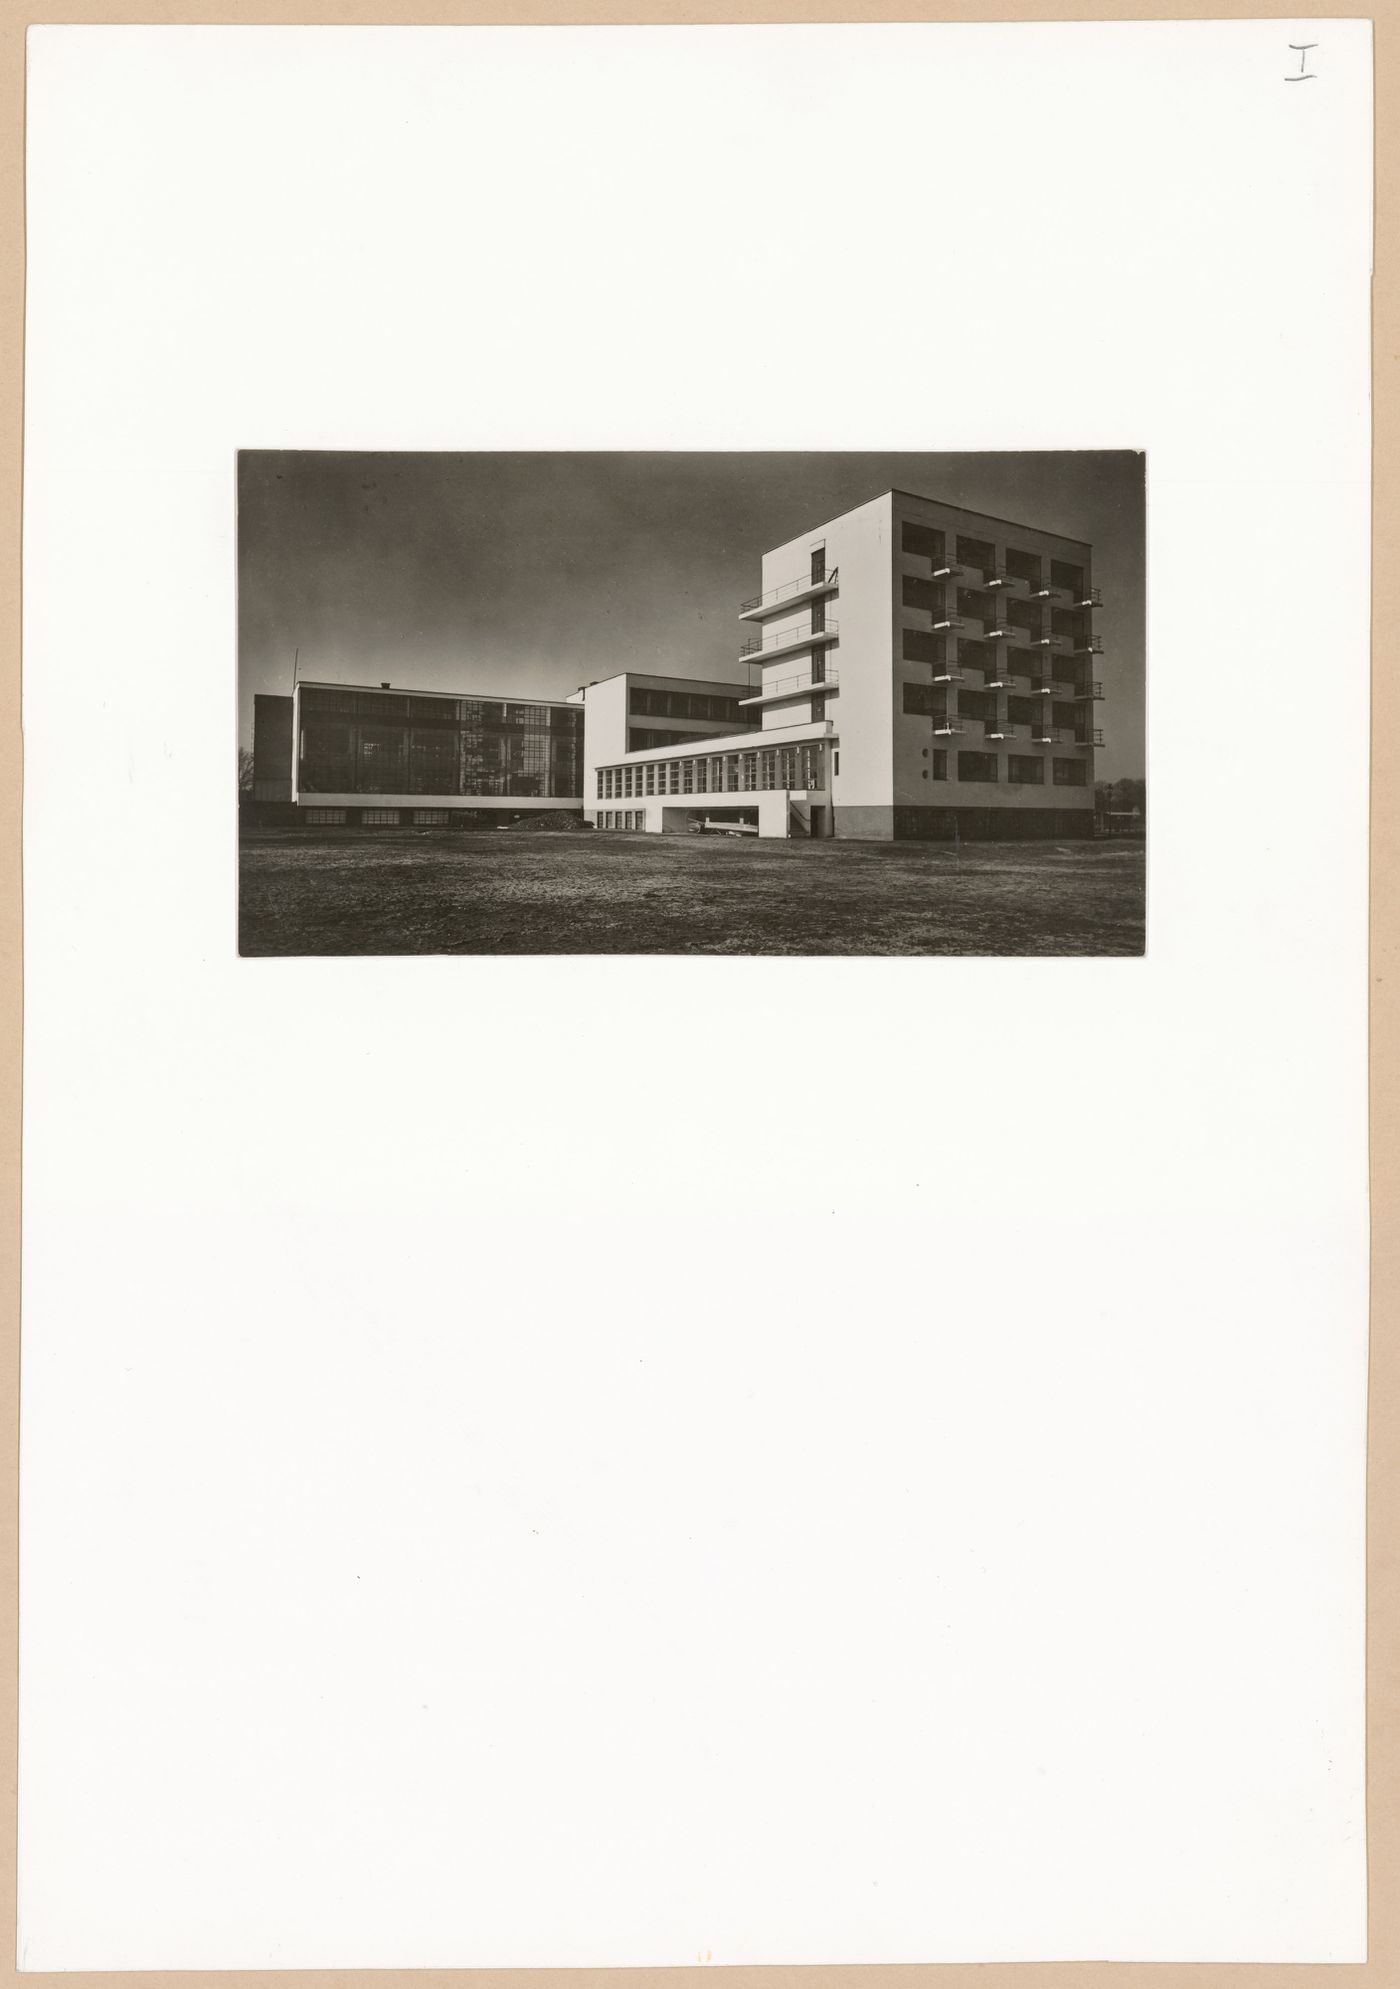 Exterior view of the Bauhaus building showing the studio wing, auditorium, cafeteria and workshop wing, Dessau, Germany